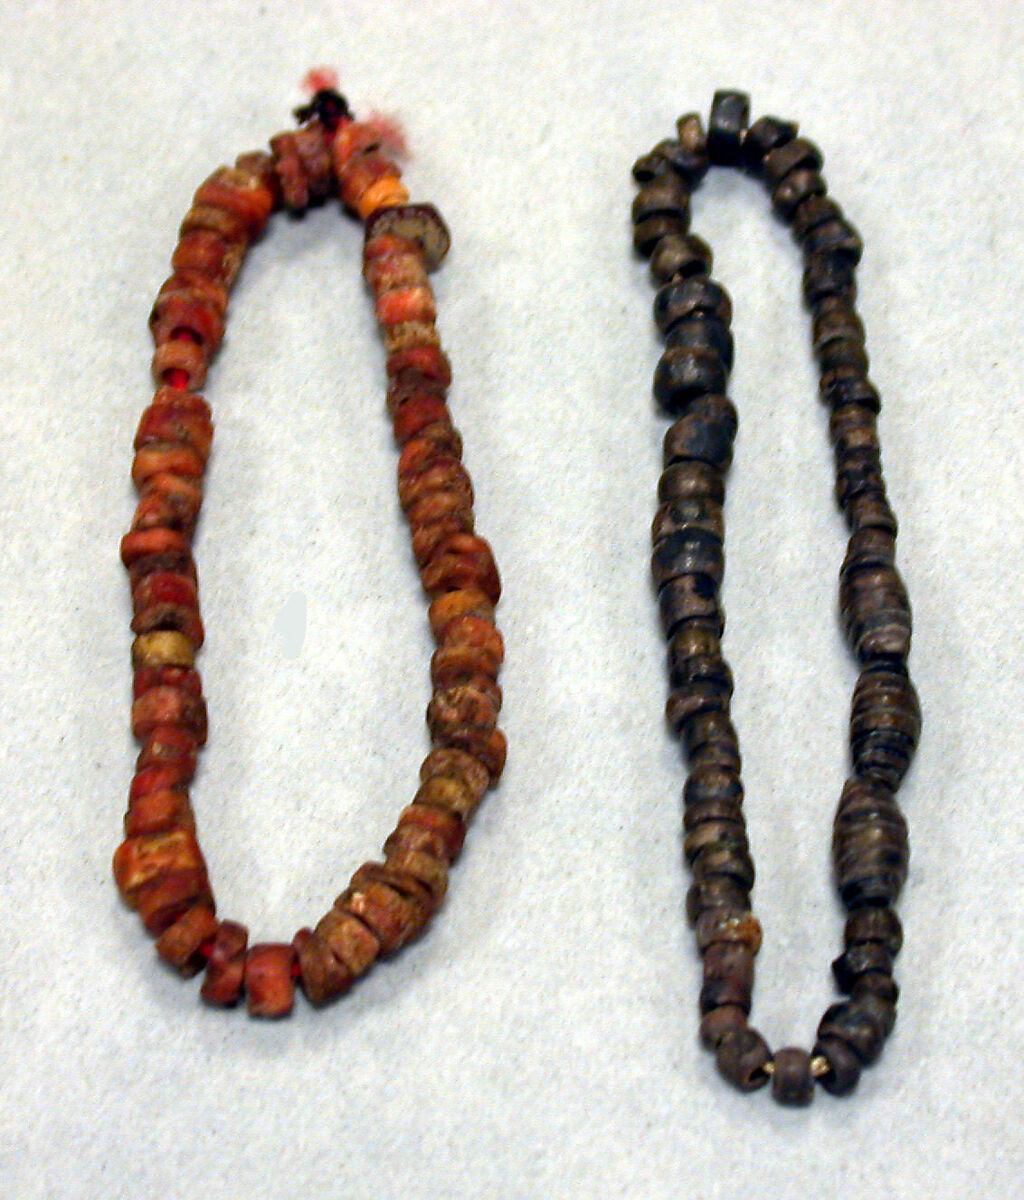 Necklace of Stone and Shell Beads, Shell beads, Peru; north coast (?) 